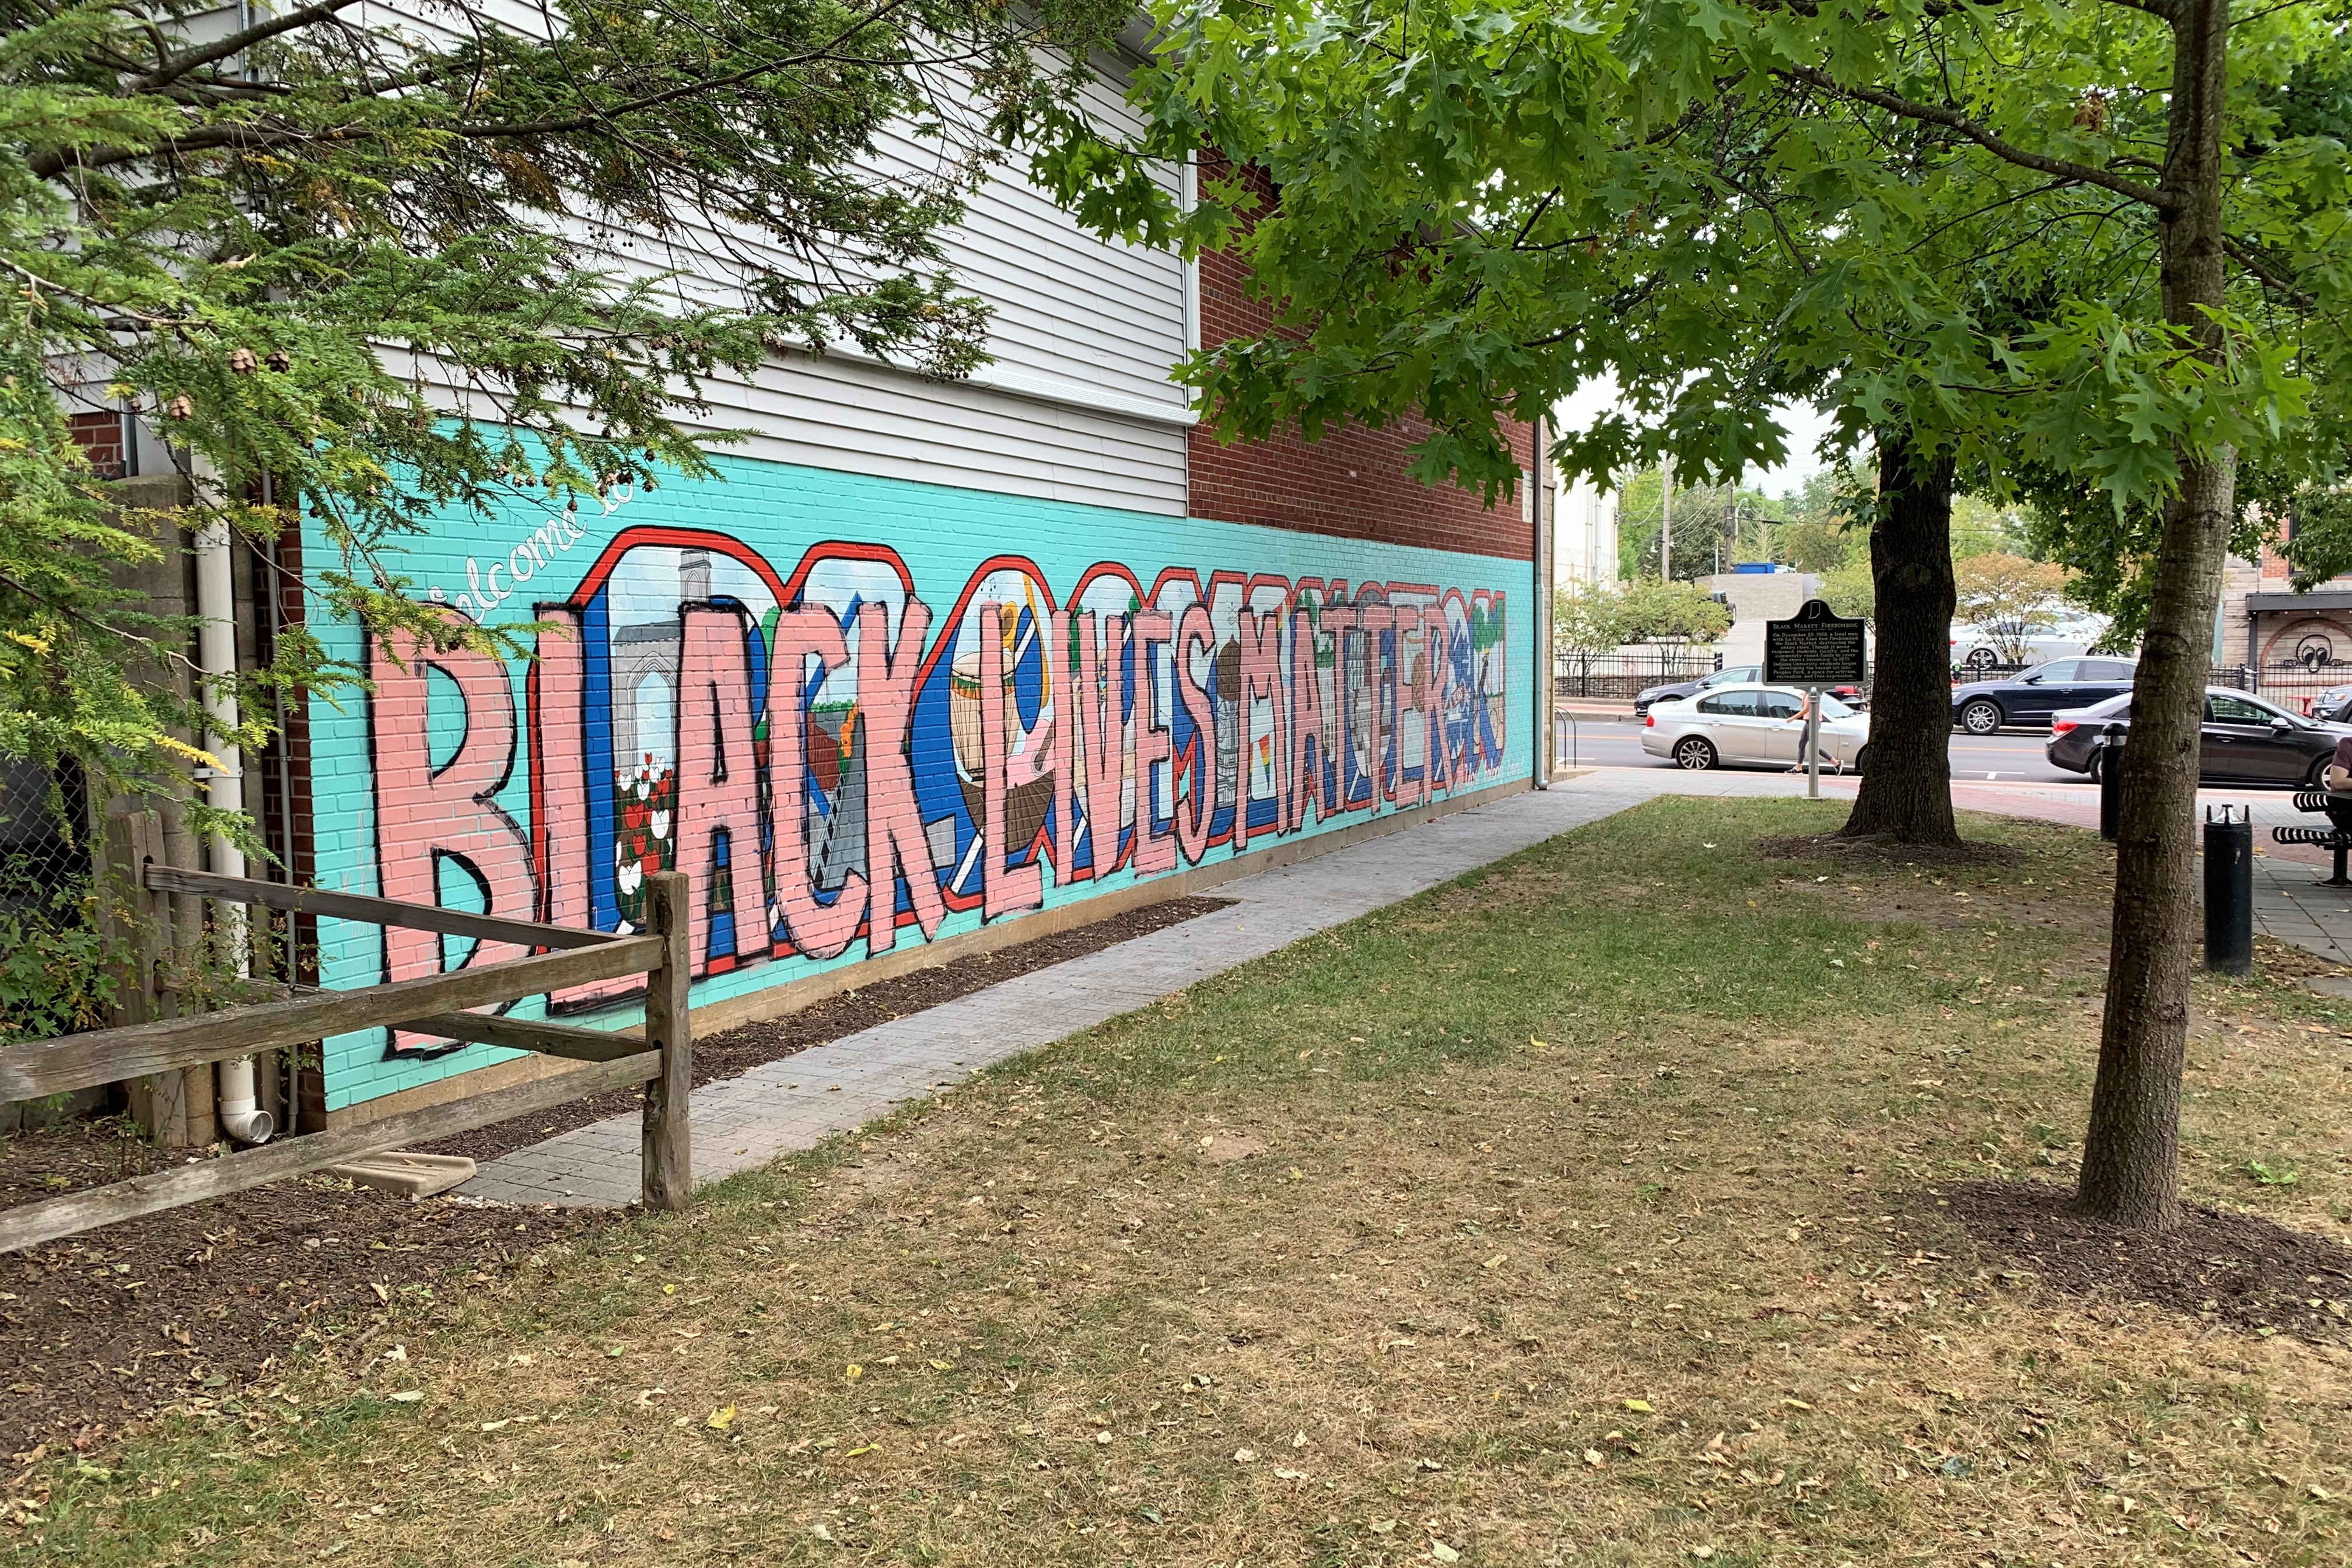 A photo of "Black Lives Matter" painted on a building in downtown Bloomington.